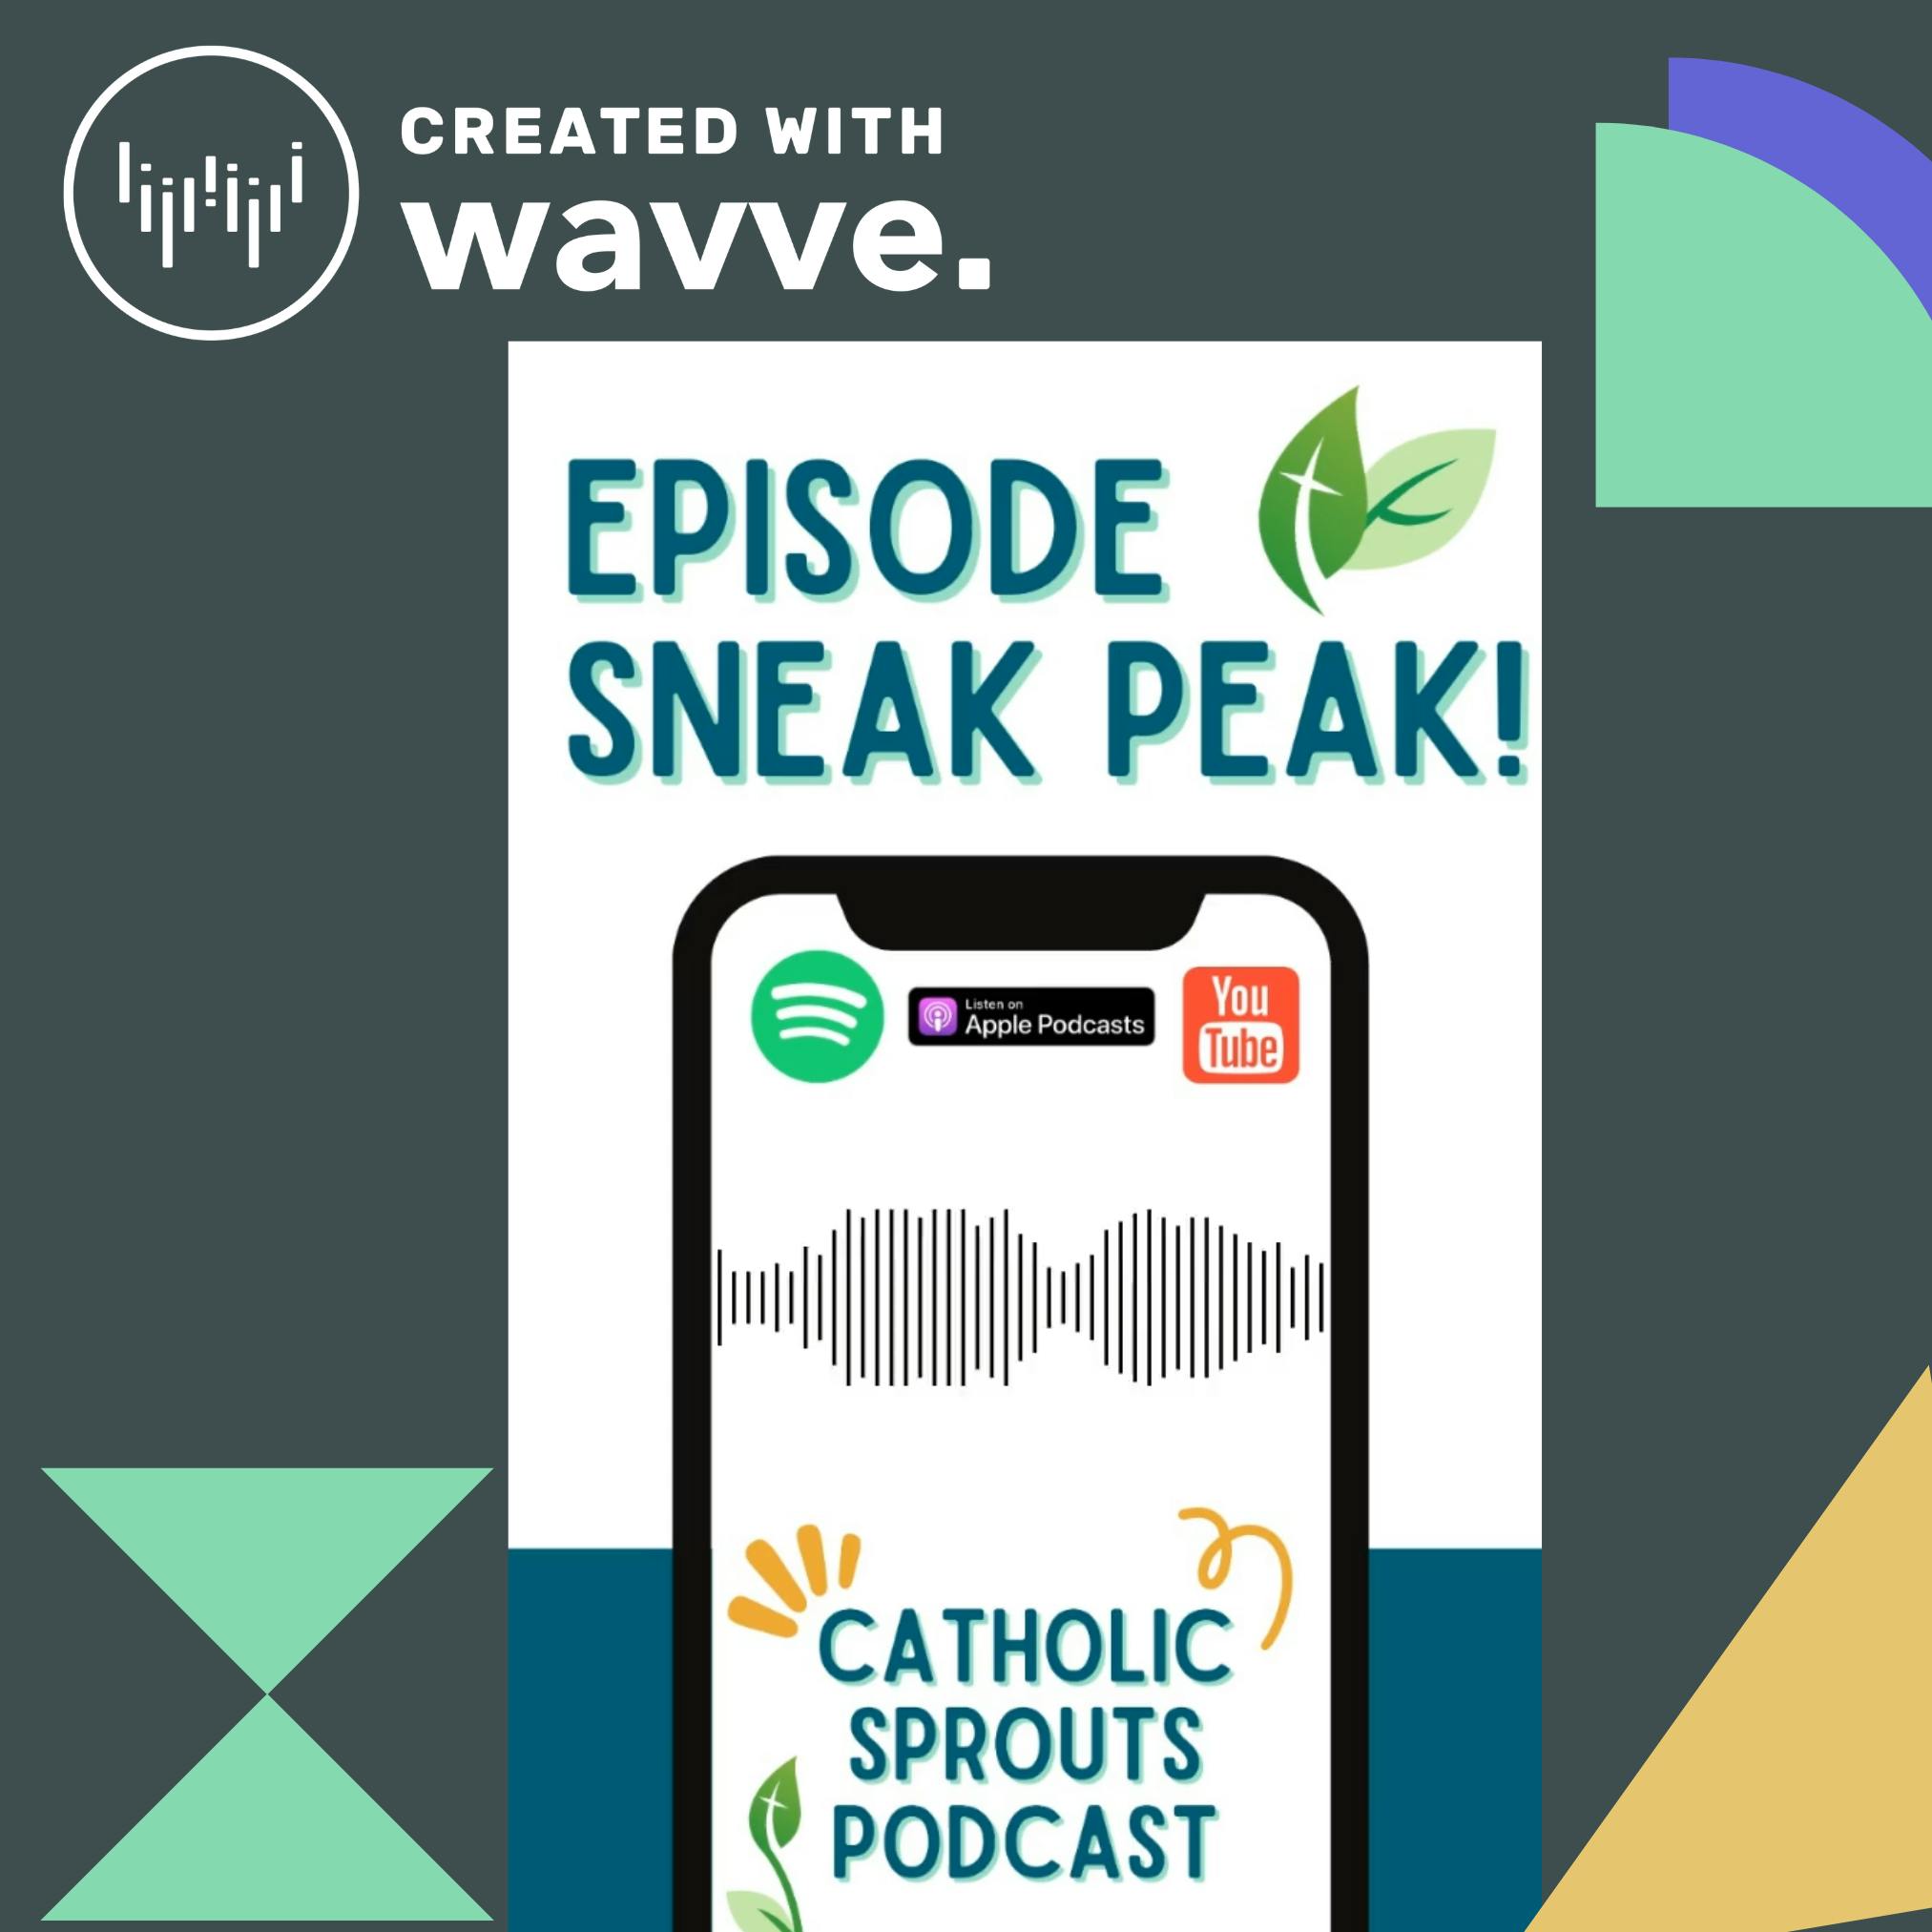 Image of an iPhone with Catholic Sprouts Podcast on it